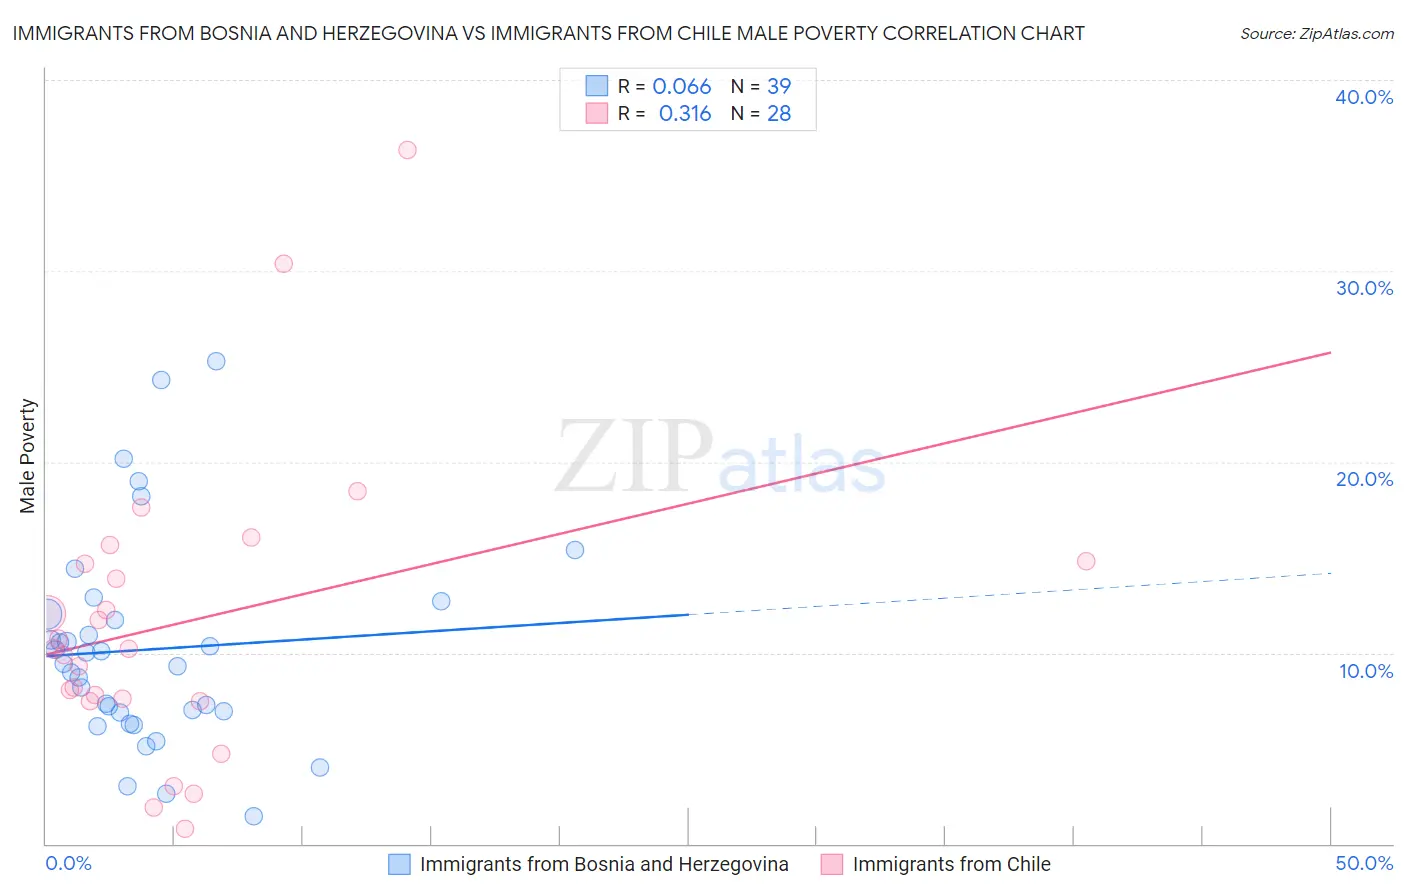 Immigrants from Bosnia and Herzegovina vs Immigrants from Chile Male Poverty